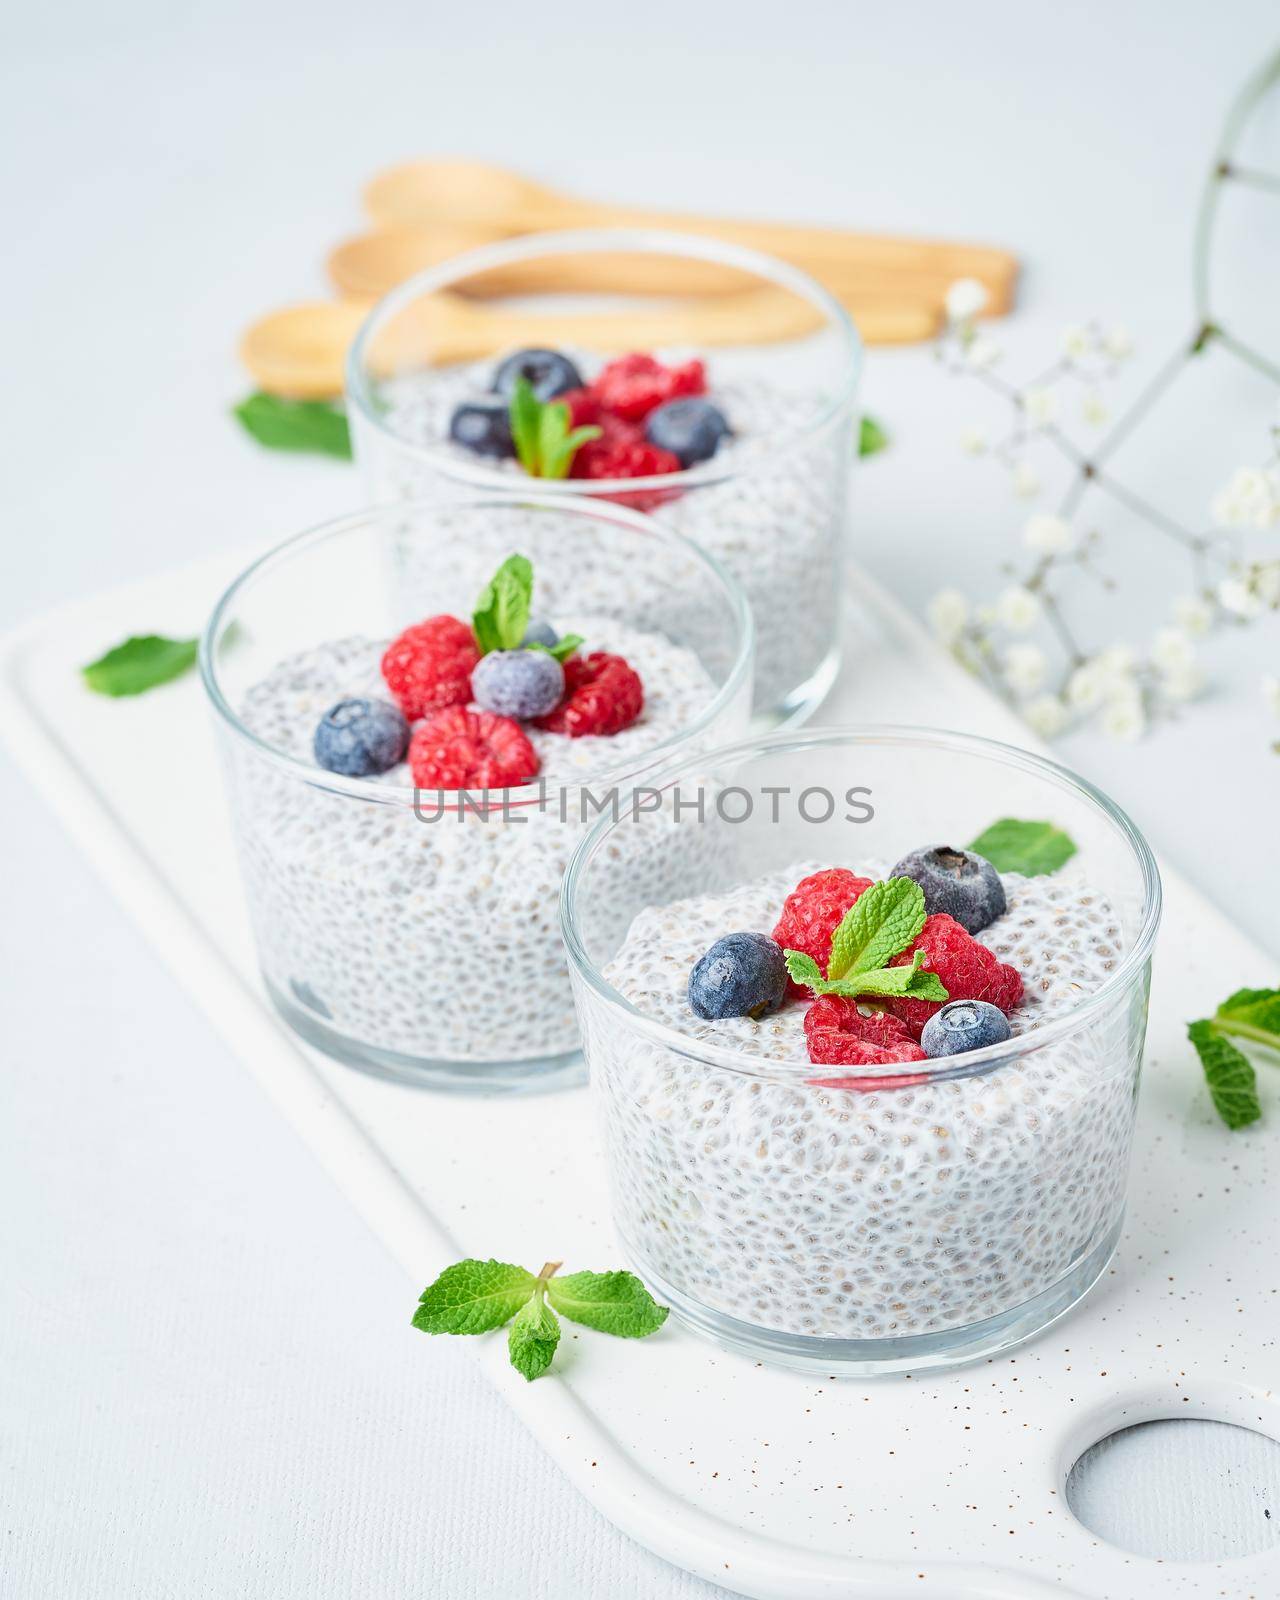 Chia pudding with fresh berries raspberries, blueberries. Three glass, light background, side view, flowers, vertical